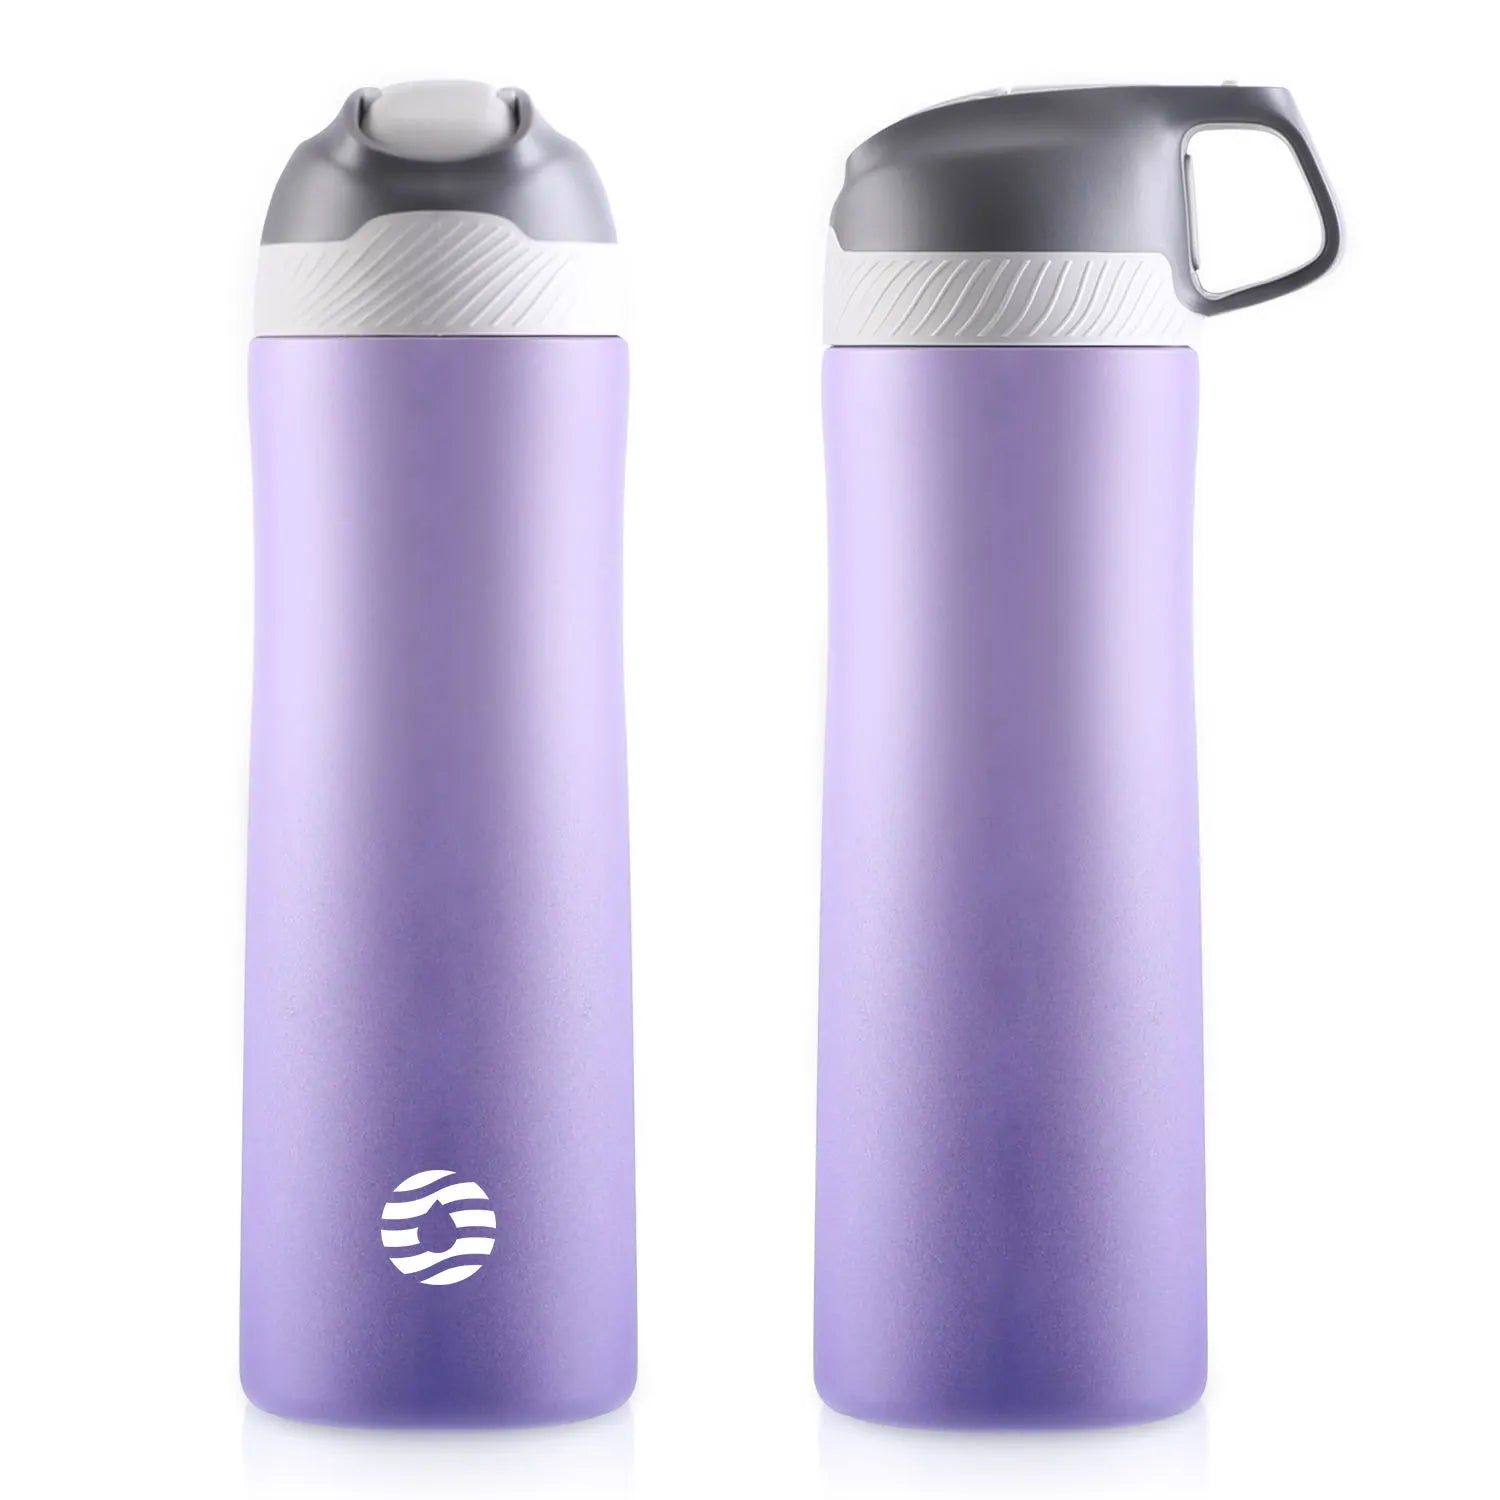 FEIJIAN Insulated Water Bottle with Straw Lid - Double Wall Thermos, Stainless Steel, Keeps Hot and Cold for School, Sports, Travel Gradient Purple550ml / 550-710ml / CHINA